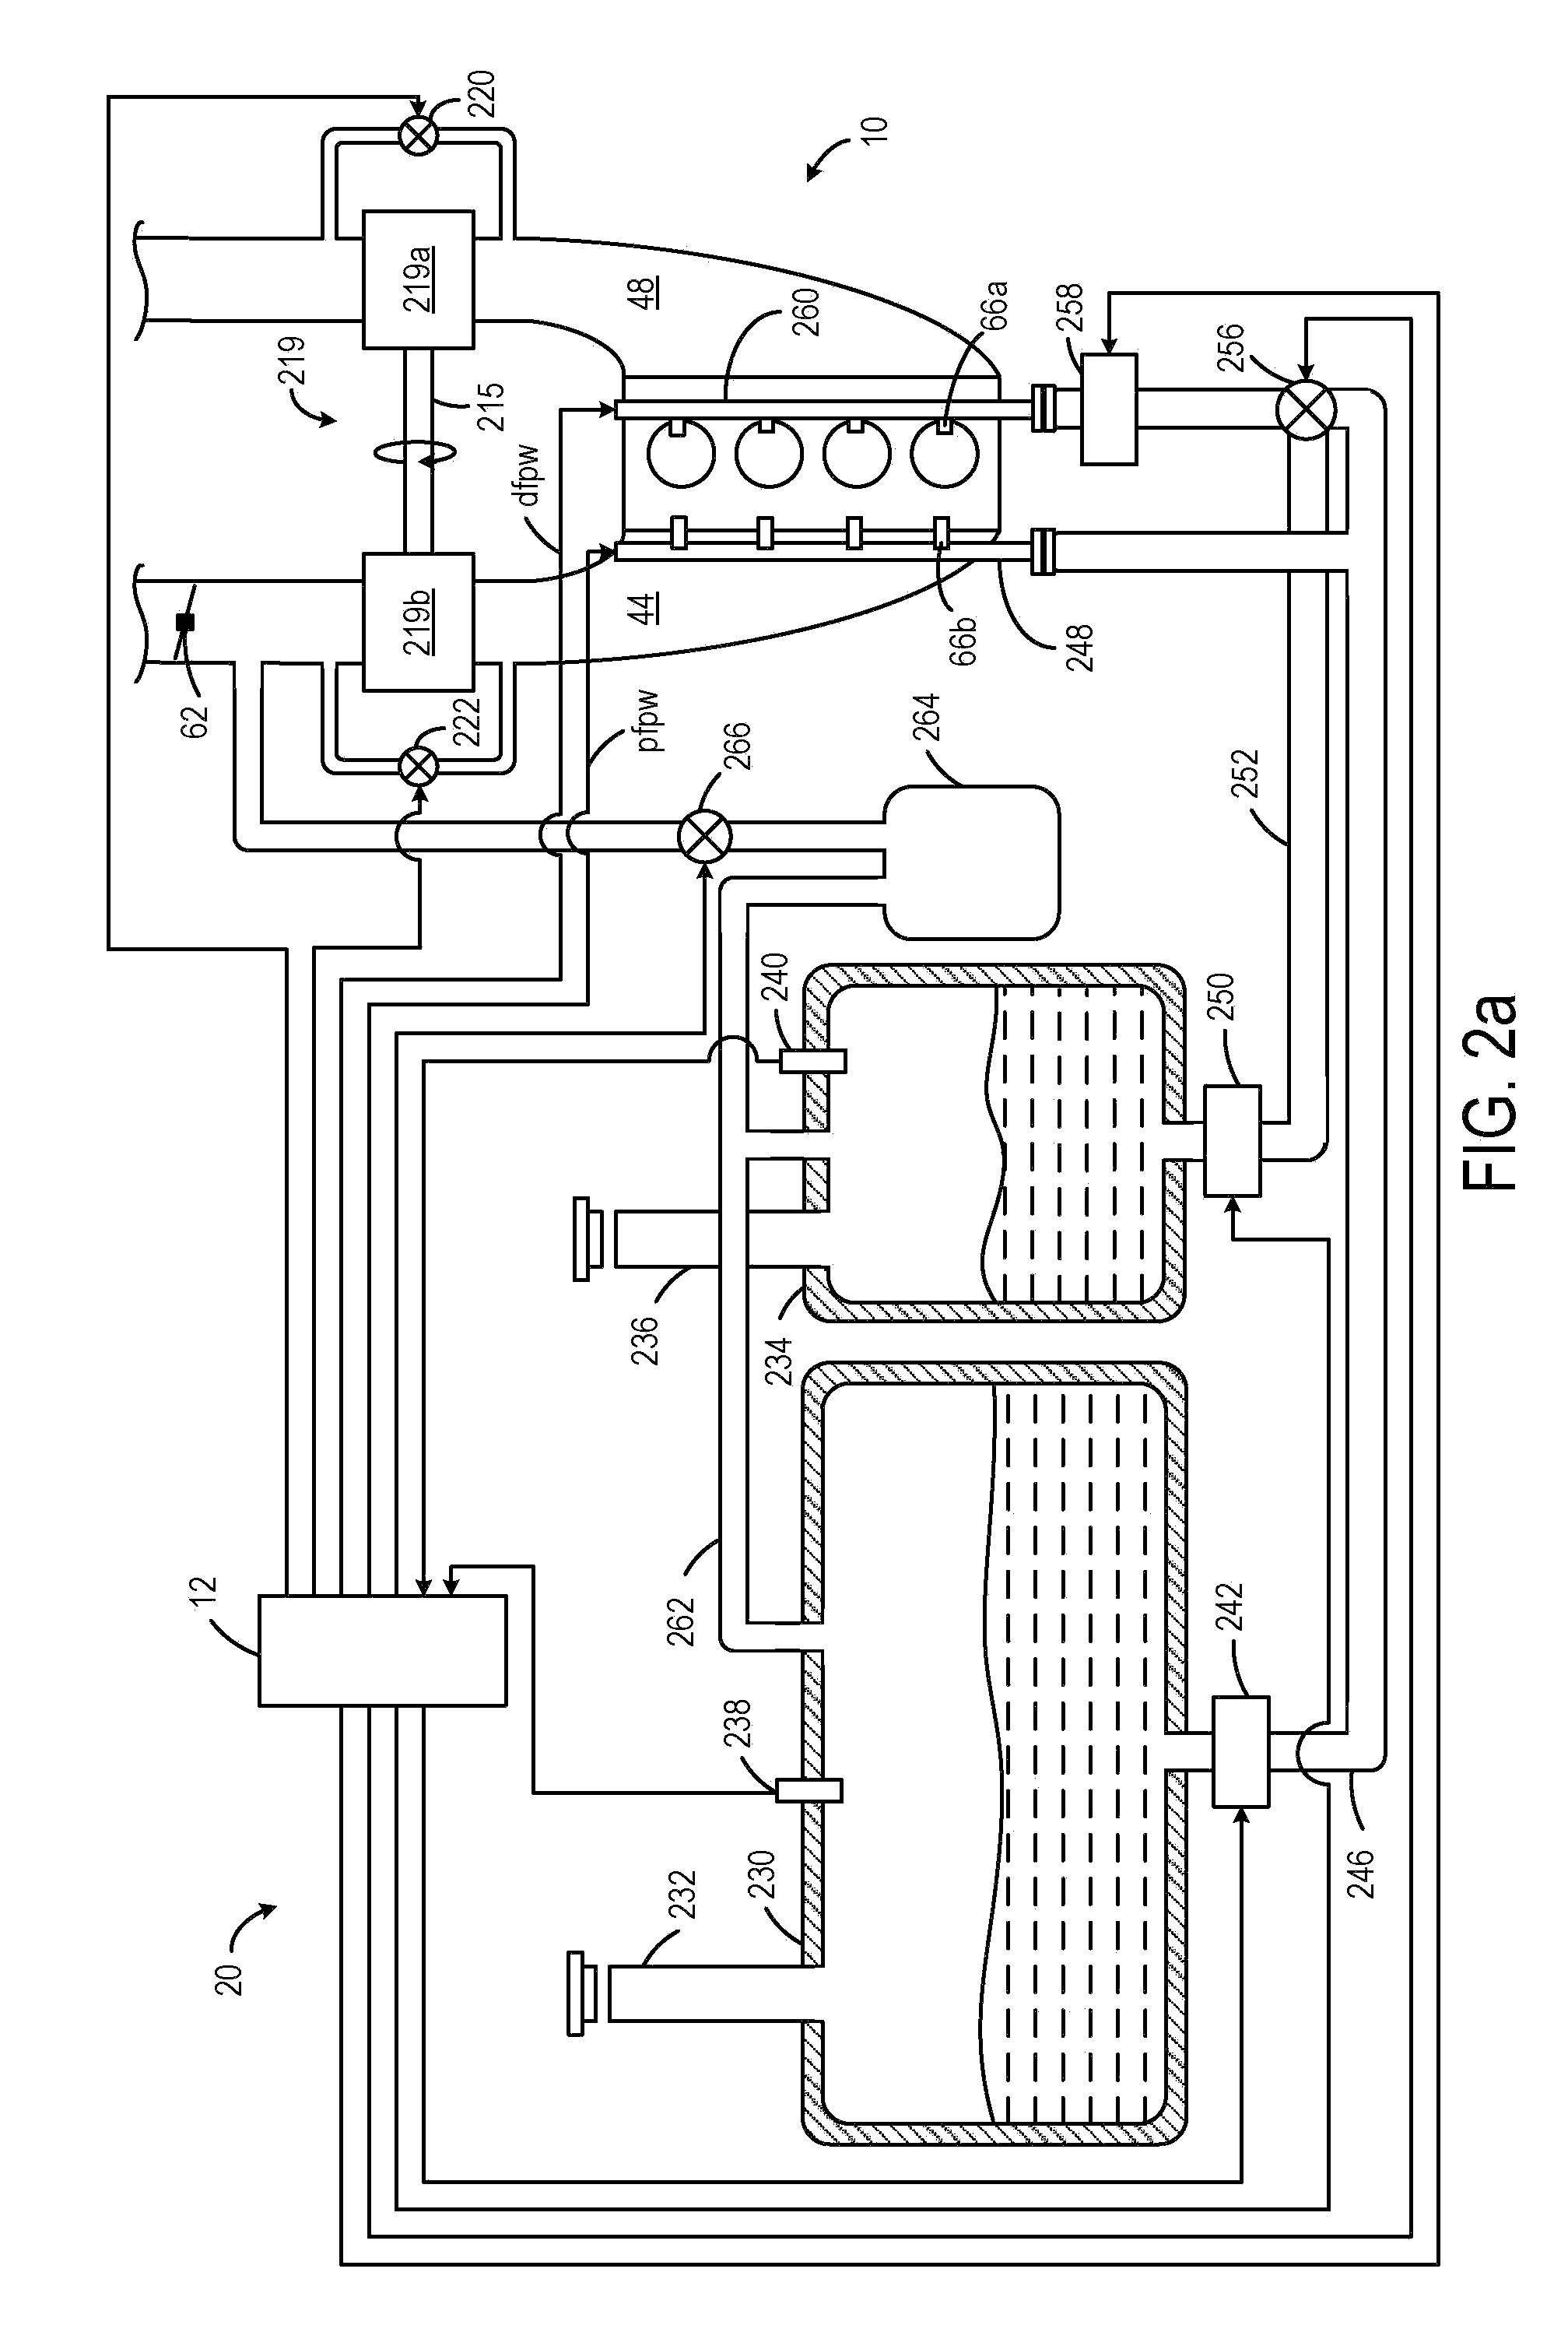 Approach for enhancing emissions control device warmup in a direct injection engine system